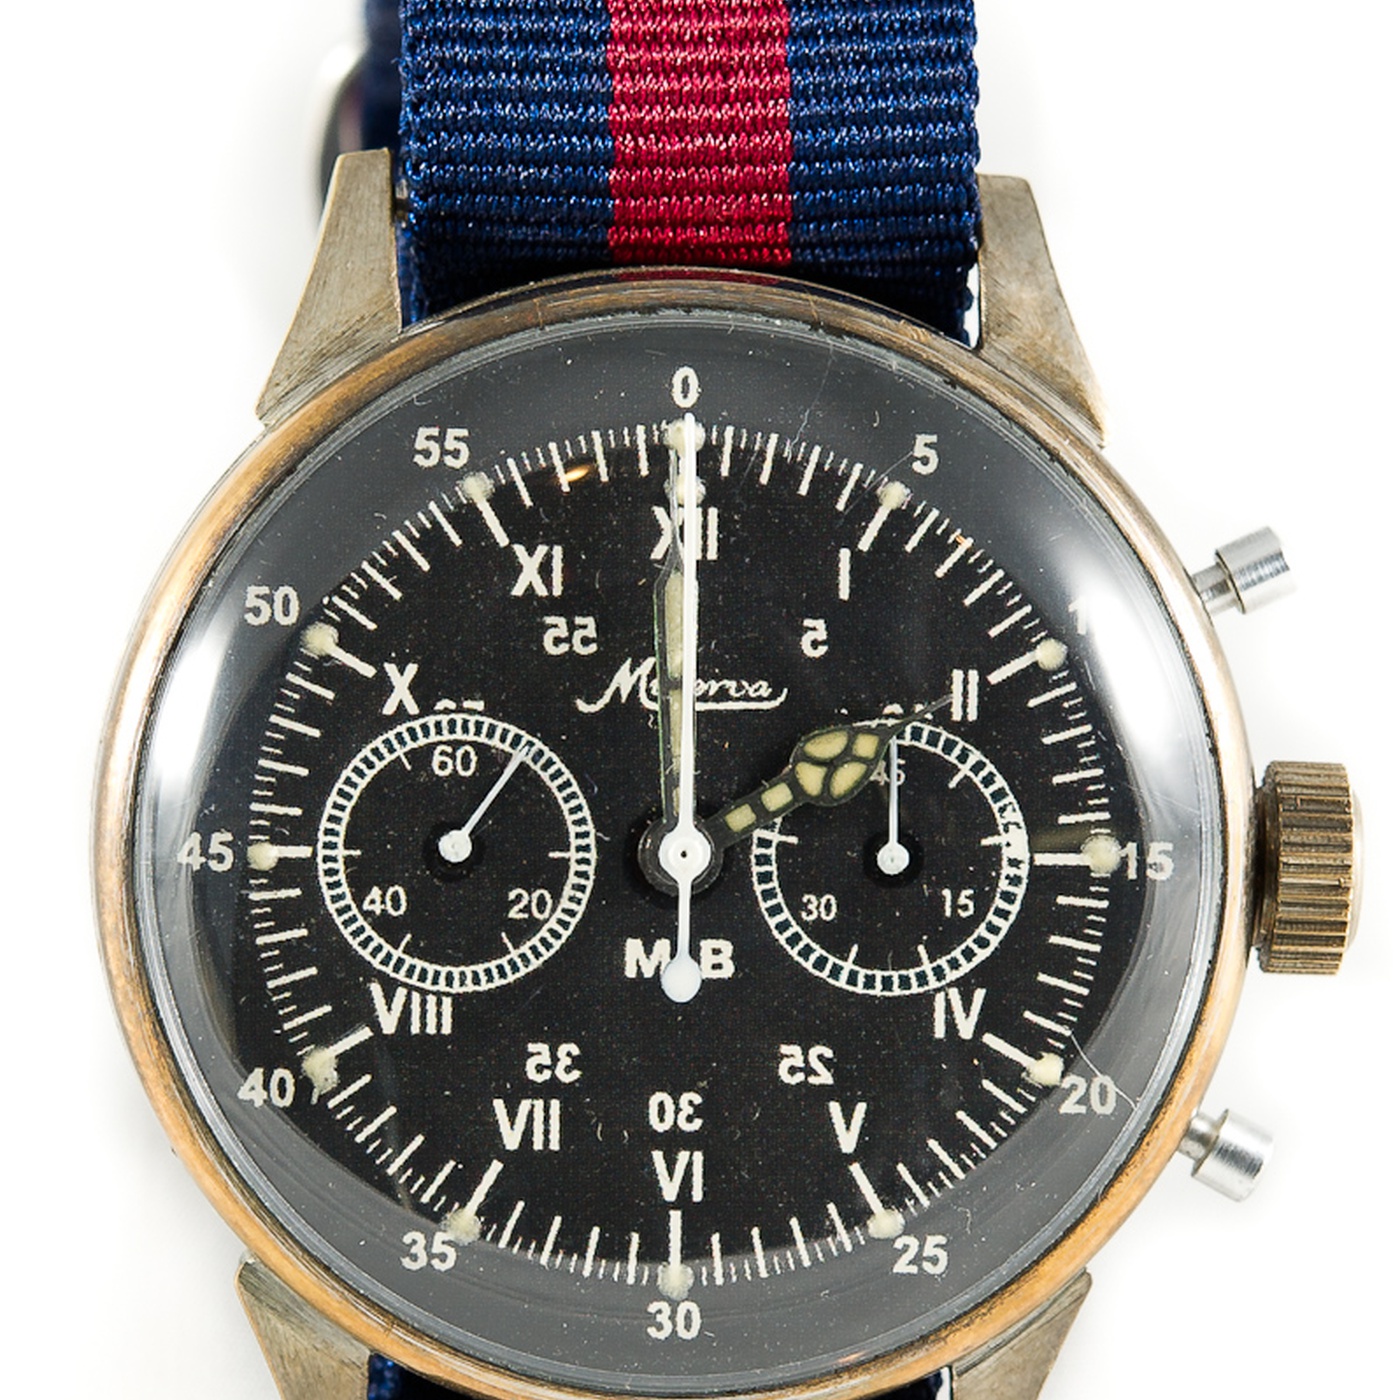 WWII Pilot Flyback Chronograph Minerva nyc